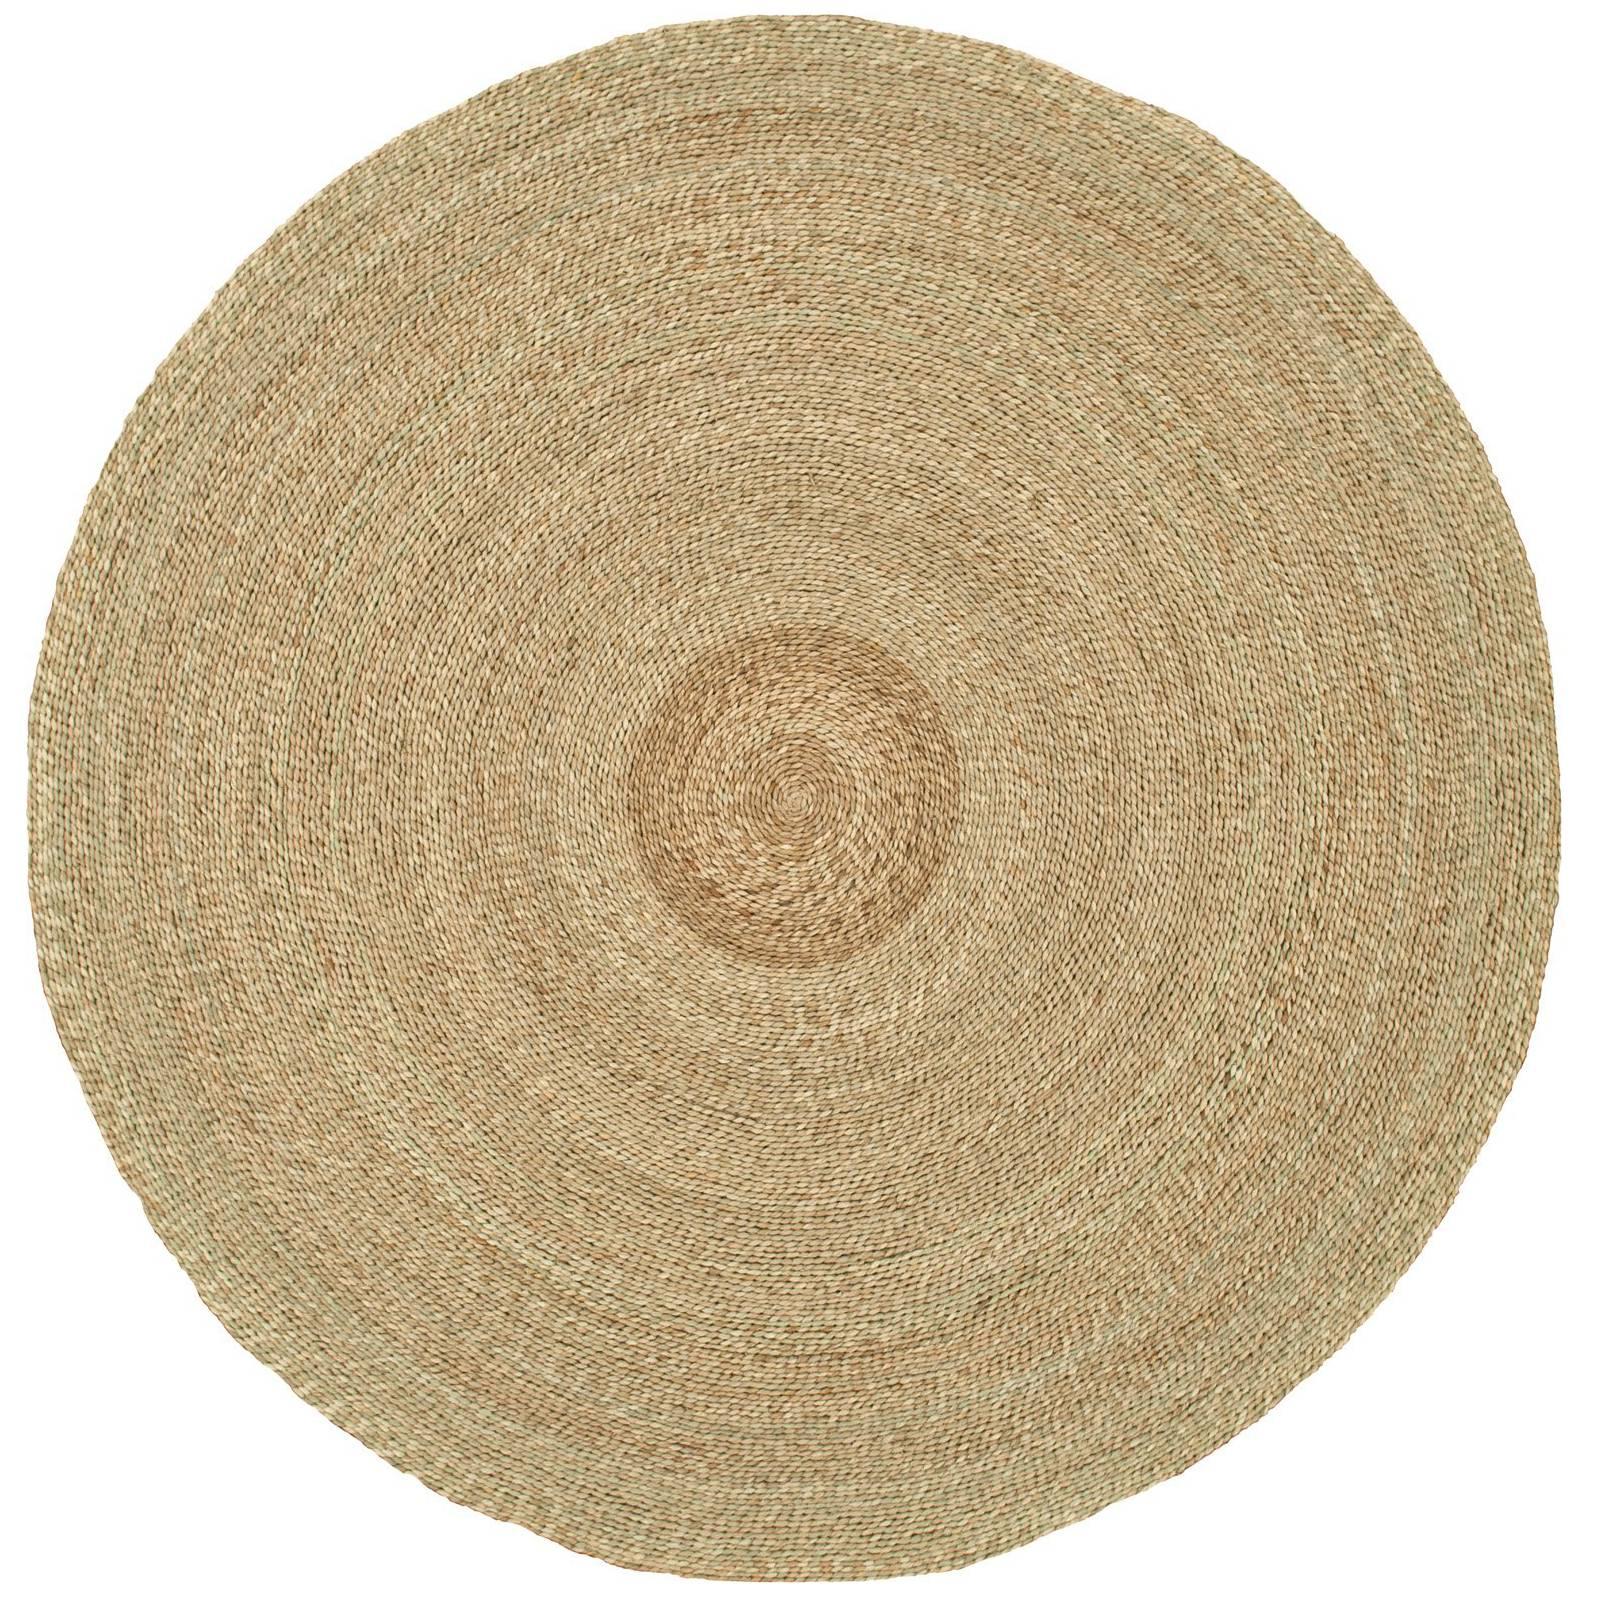 Contemporary South African Handwoven Rush Mat